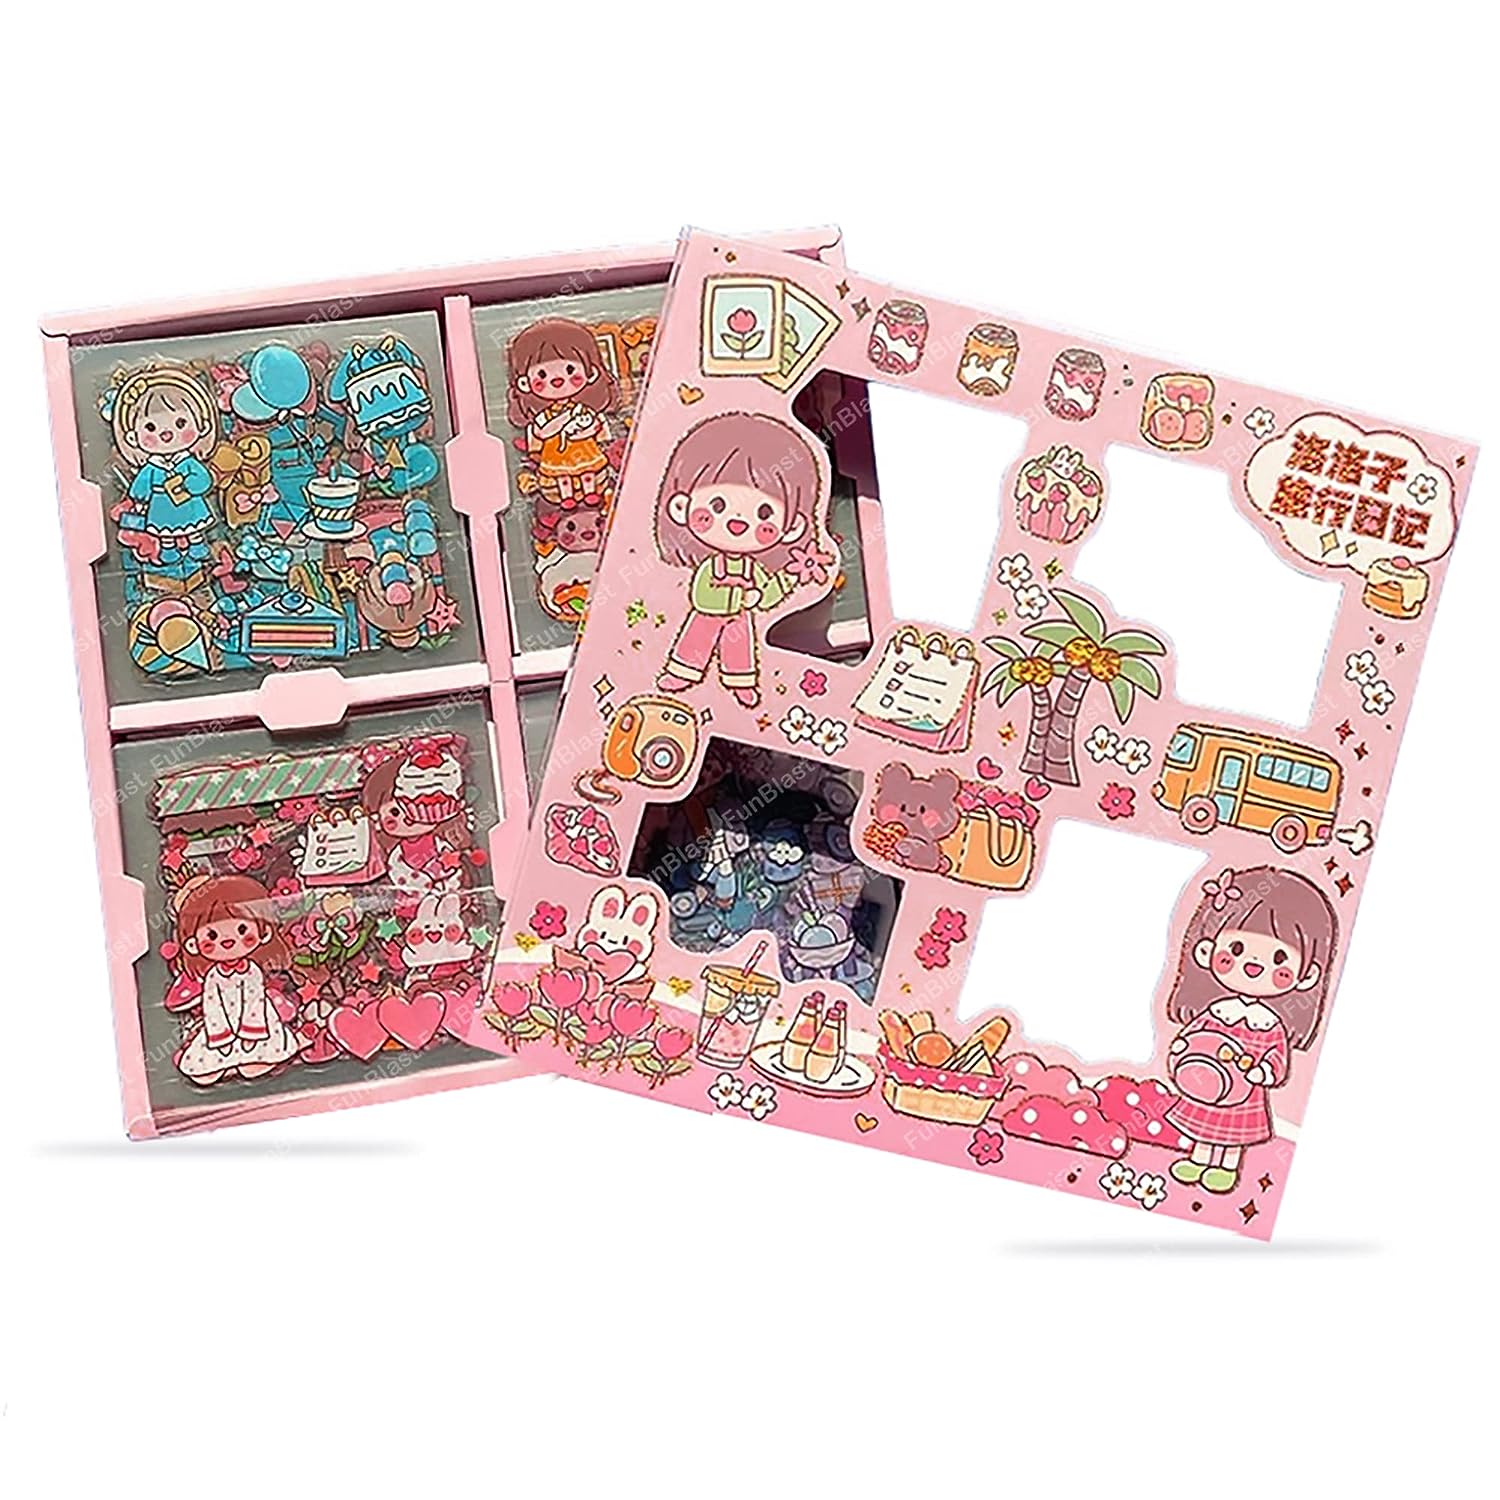 Pvc Cute Girl Theme Kawaii Stickers – 100 Sheets Cute Washi Stickers For Project, Japanese Style Girls Sticker Set, Stationery Item – (Assorted Design)